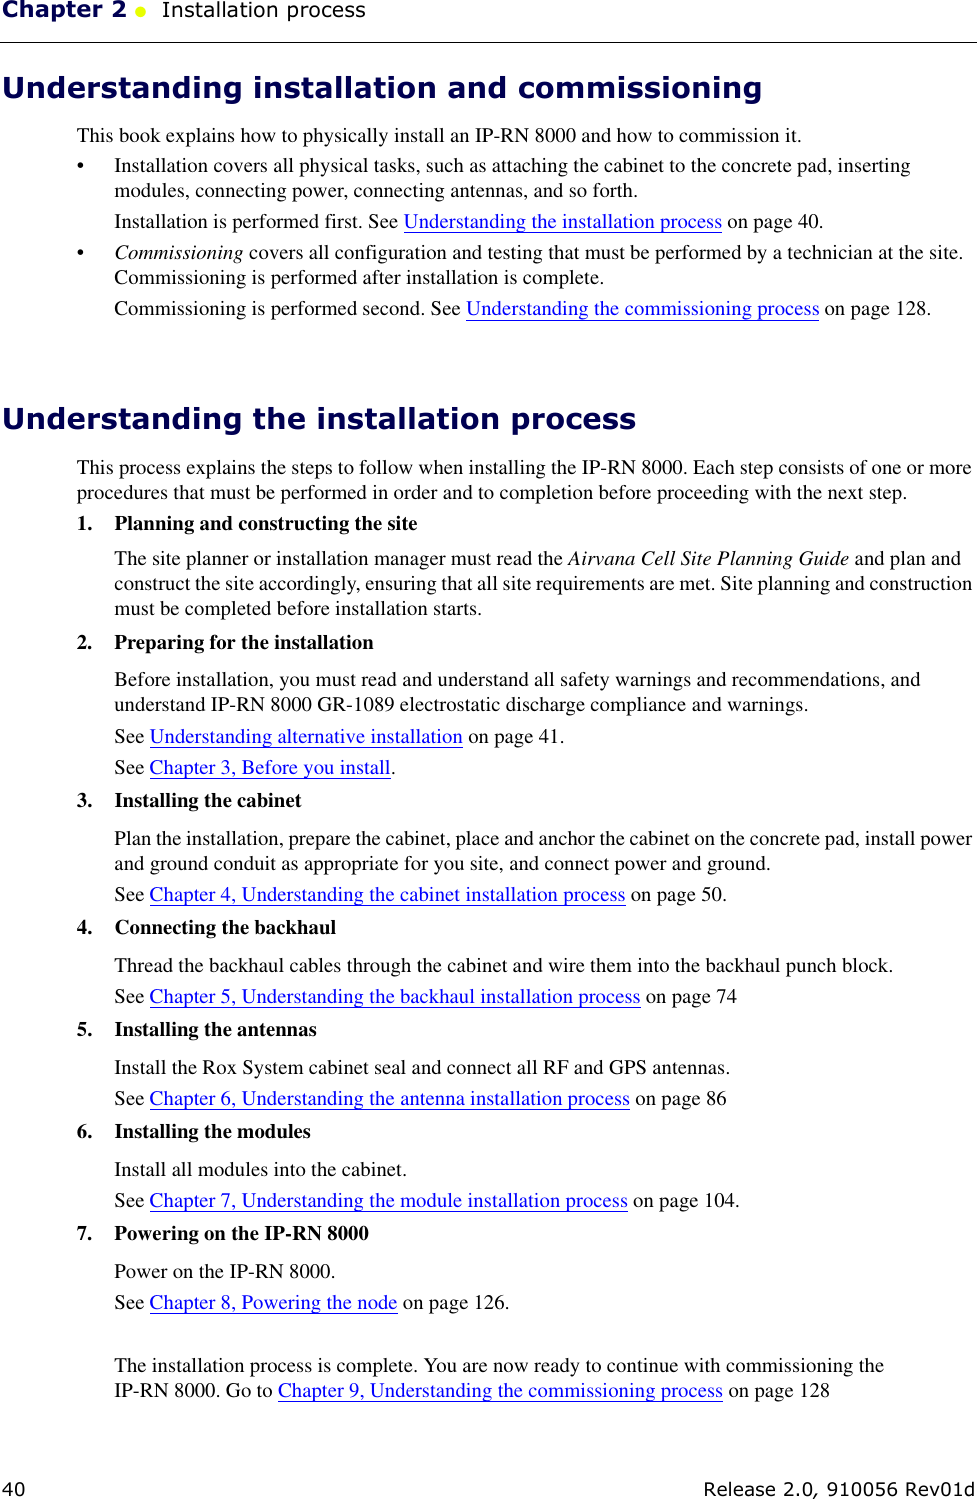 Chapter 2 ●  Installation process40 Release 2.0, 910056 Rev01dUnderstanding installation and commissioningThis book explains how to physically install an IP-RN 8000 and how to commission it. • Installation covers all physical tasks, such as attaching the cabinet to the concrete pad, inserting modules, connecting power, connecting antennas, and so forth. Installation is performed first. See Understanding the installation process on page 40.•Commissioning covers all configuration and testing that must be performed by a technician at the site. Commissioning is performed after installation is complete.Commissioning is performed second. See Understanding the commissioning process on page 128.Understanding the installation processThis process explains the steps to follow when installing the IP-RN 8000. Each step consists of one or more procedures that must be performed in order and to completion before proceeding with the next step. 1. Planning and constructing the siteThe site planner or installation manager must read the Airvana Cell Site Planning Guide and plan and construct the site accordingly, ensuring that all site requirements are met. Site planning and construction must be completed before installation starts.2. Preparing for the installationBefore installation, you must read and understand all safety warnings and recommendations, and understand IP-RN 8000 GR-1089 electrostatic discharge compliance and warnings. See Understanding alternative installation on page 41.See Chapter 3, Before you install.3. Installing the cabinetPlan the installation, prepare the cabinet, place and anchor the cabinet on the concrete pad, install power and ground conduit as appropriate for you site, and connect power and ground. See Chapter 4, Understanding the cabinet installation process on page 50.4. Connecting the backhaulThread the backhaul cables through the cabinet and wire them into the backhaul punch block.See Chapter 5, Understanding the backhaul installation process on page 745. Installing the antennasInstall the Rox System cabinet seal and connect all RF and GPS antennas.See Chapter 6, Understanding the antenna installation process on page 866. Installing the modulesInstall all modules into the cabinet.See Chapter 7, Understanding the module installation process on page 104.7. Powering on the IP-RN 8000Power on the IP-RN 8000.See Chapter 8, Powering the node on page 126.The installation process is complete. You are now ready to continue with commissioning the IP-RN 8000. Go to Chapter 9, Understanding the commissioning process on page 128